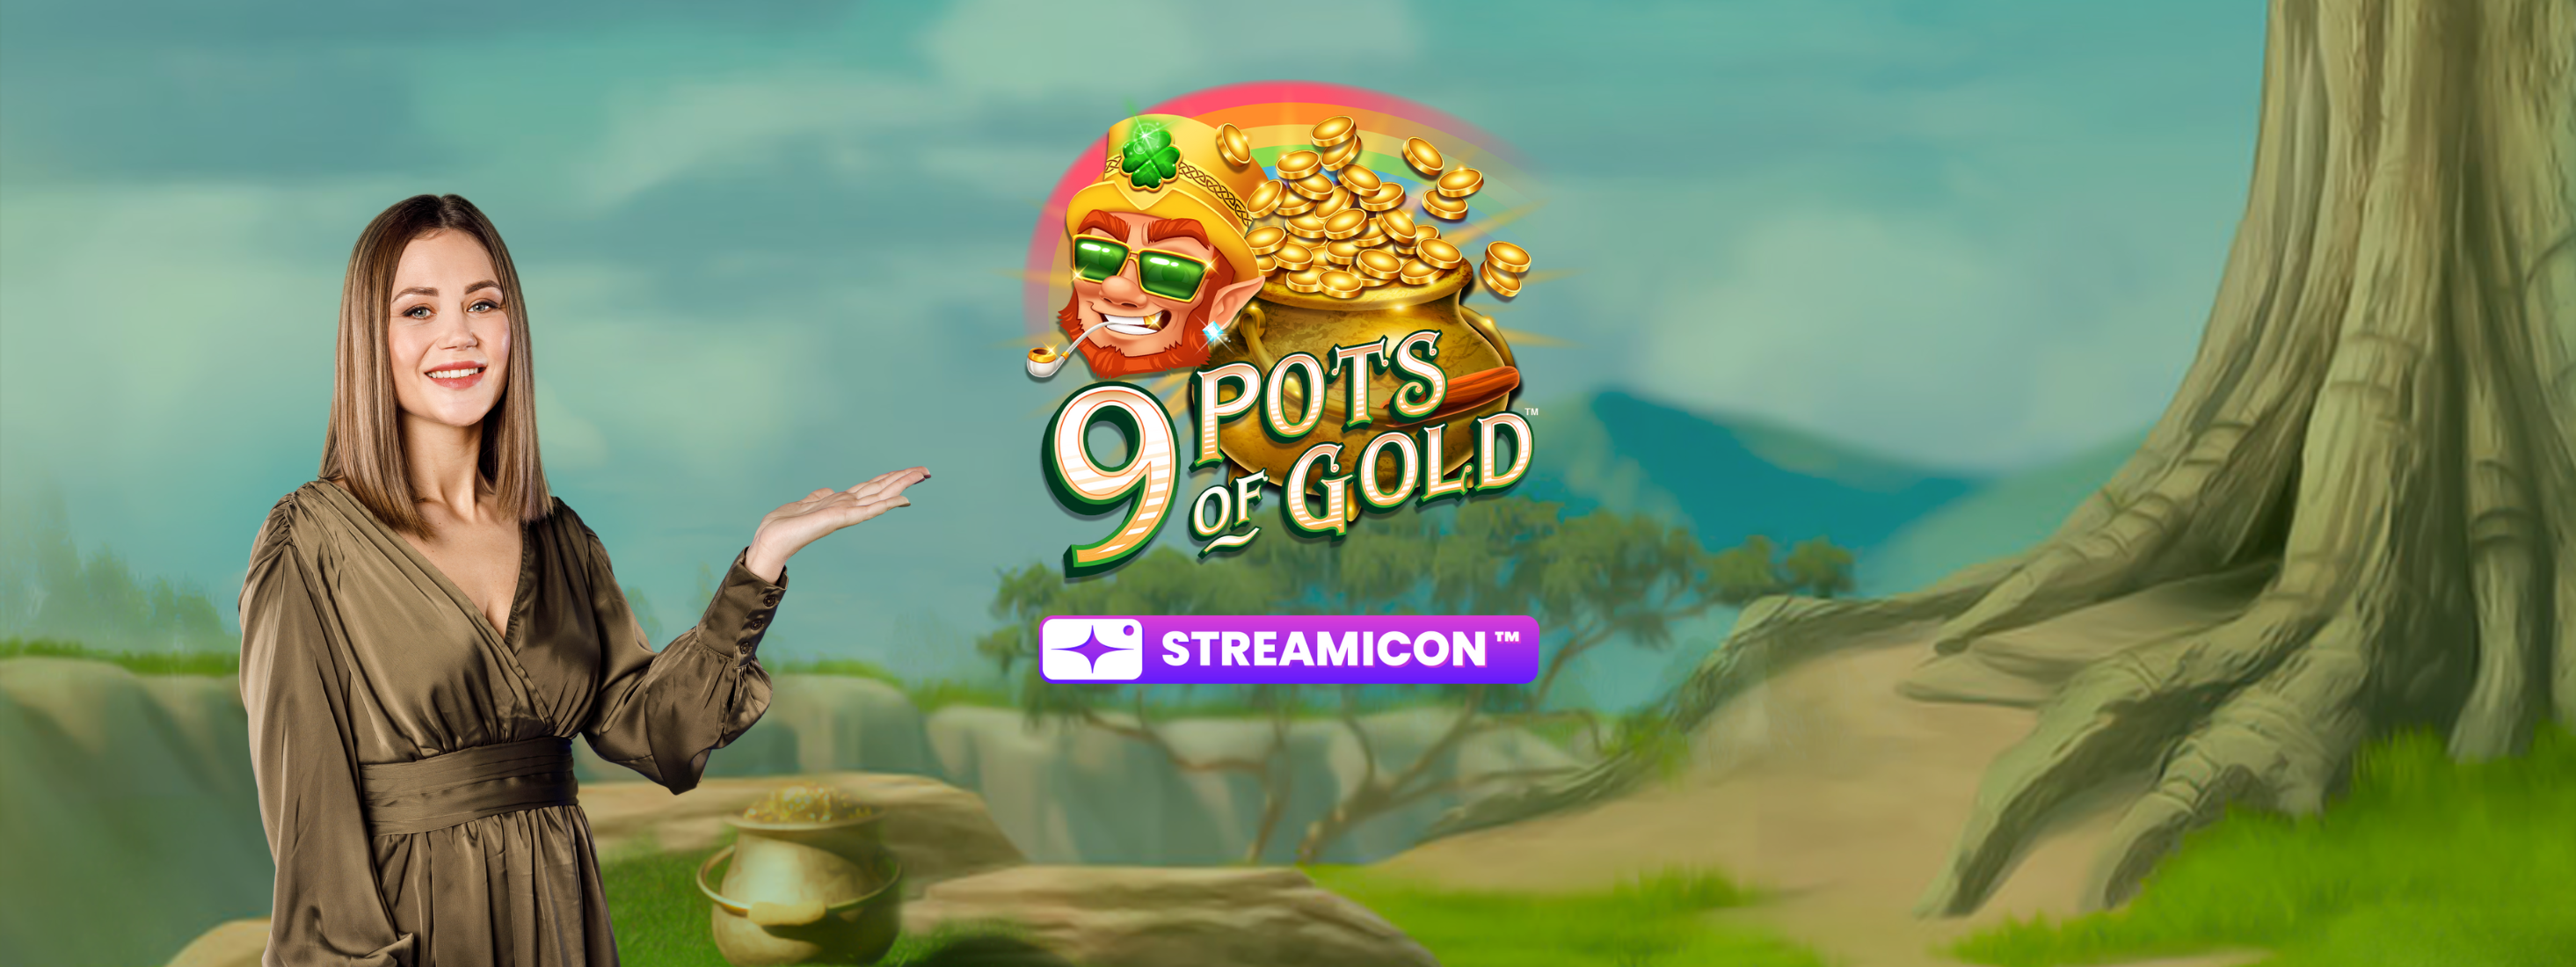 9 Pots of Gold banner with the logo in the centre against a leprauchan-themed background, the streamicon logo, and a female presenter.